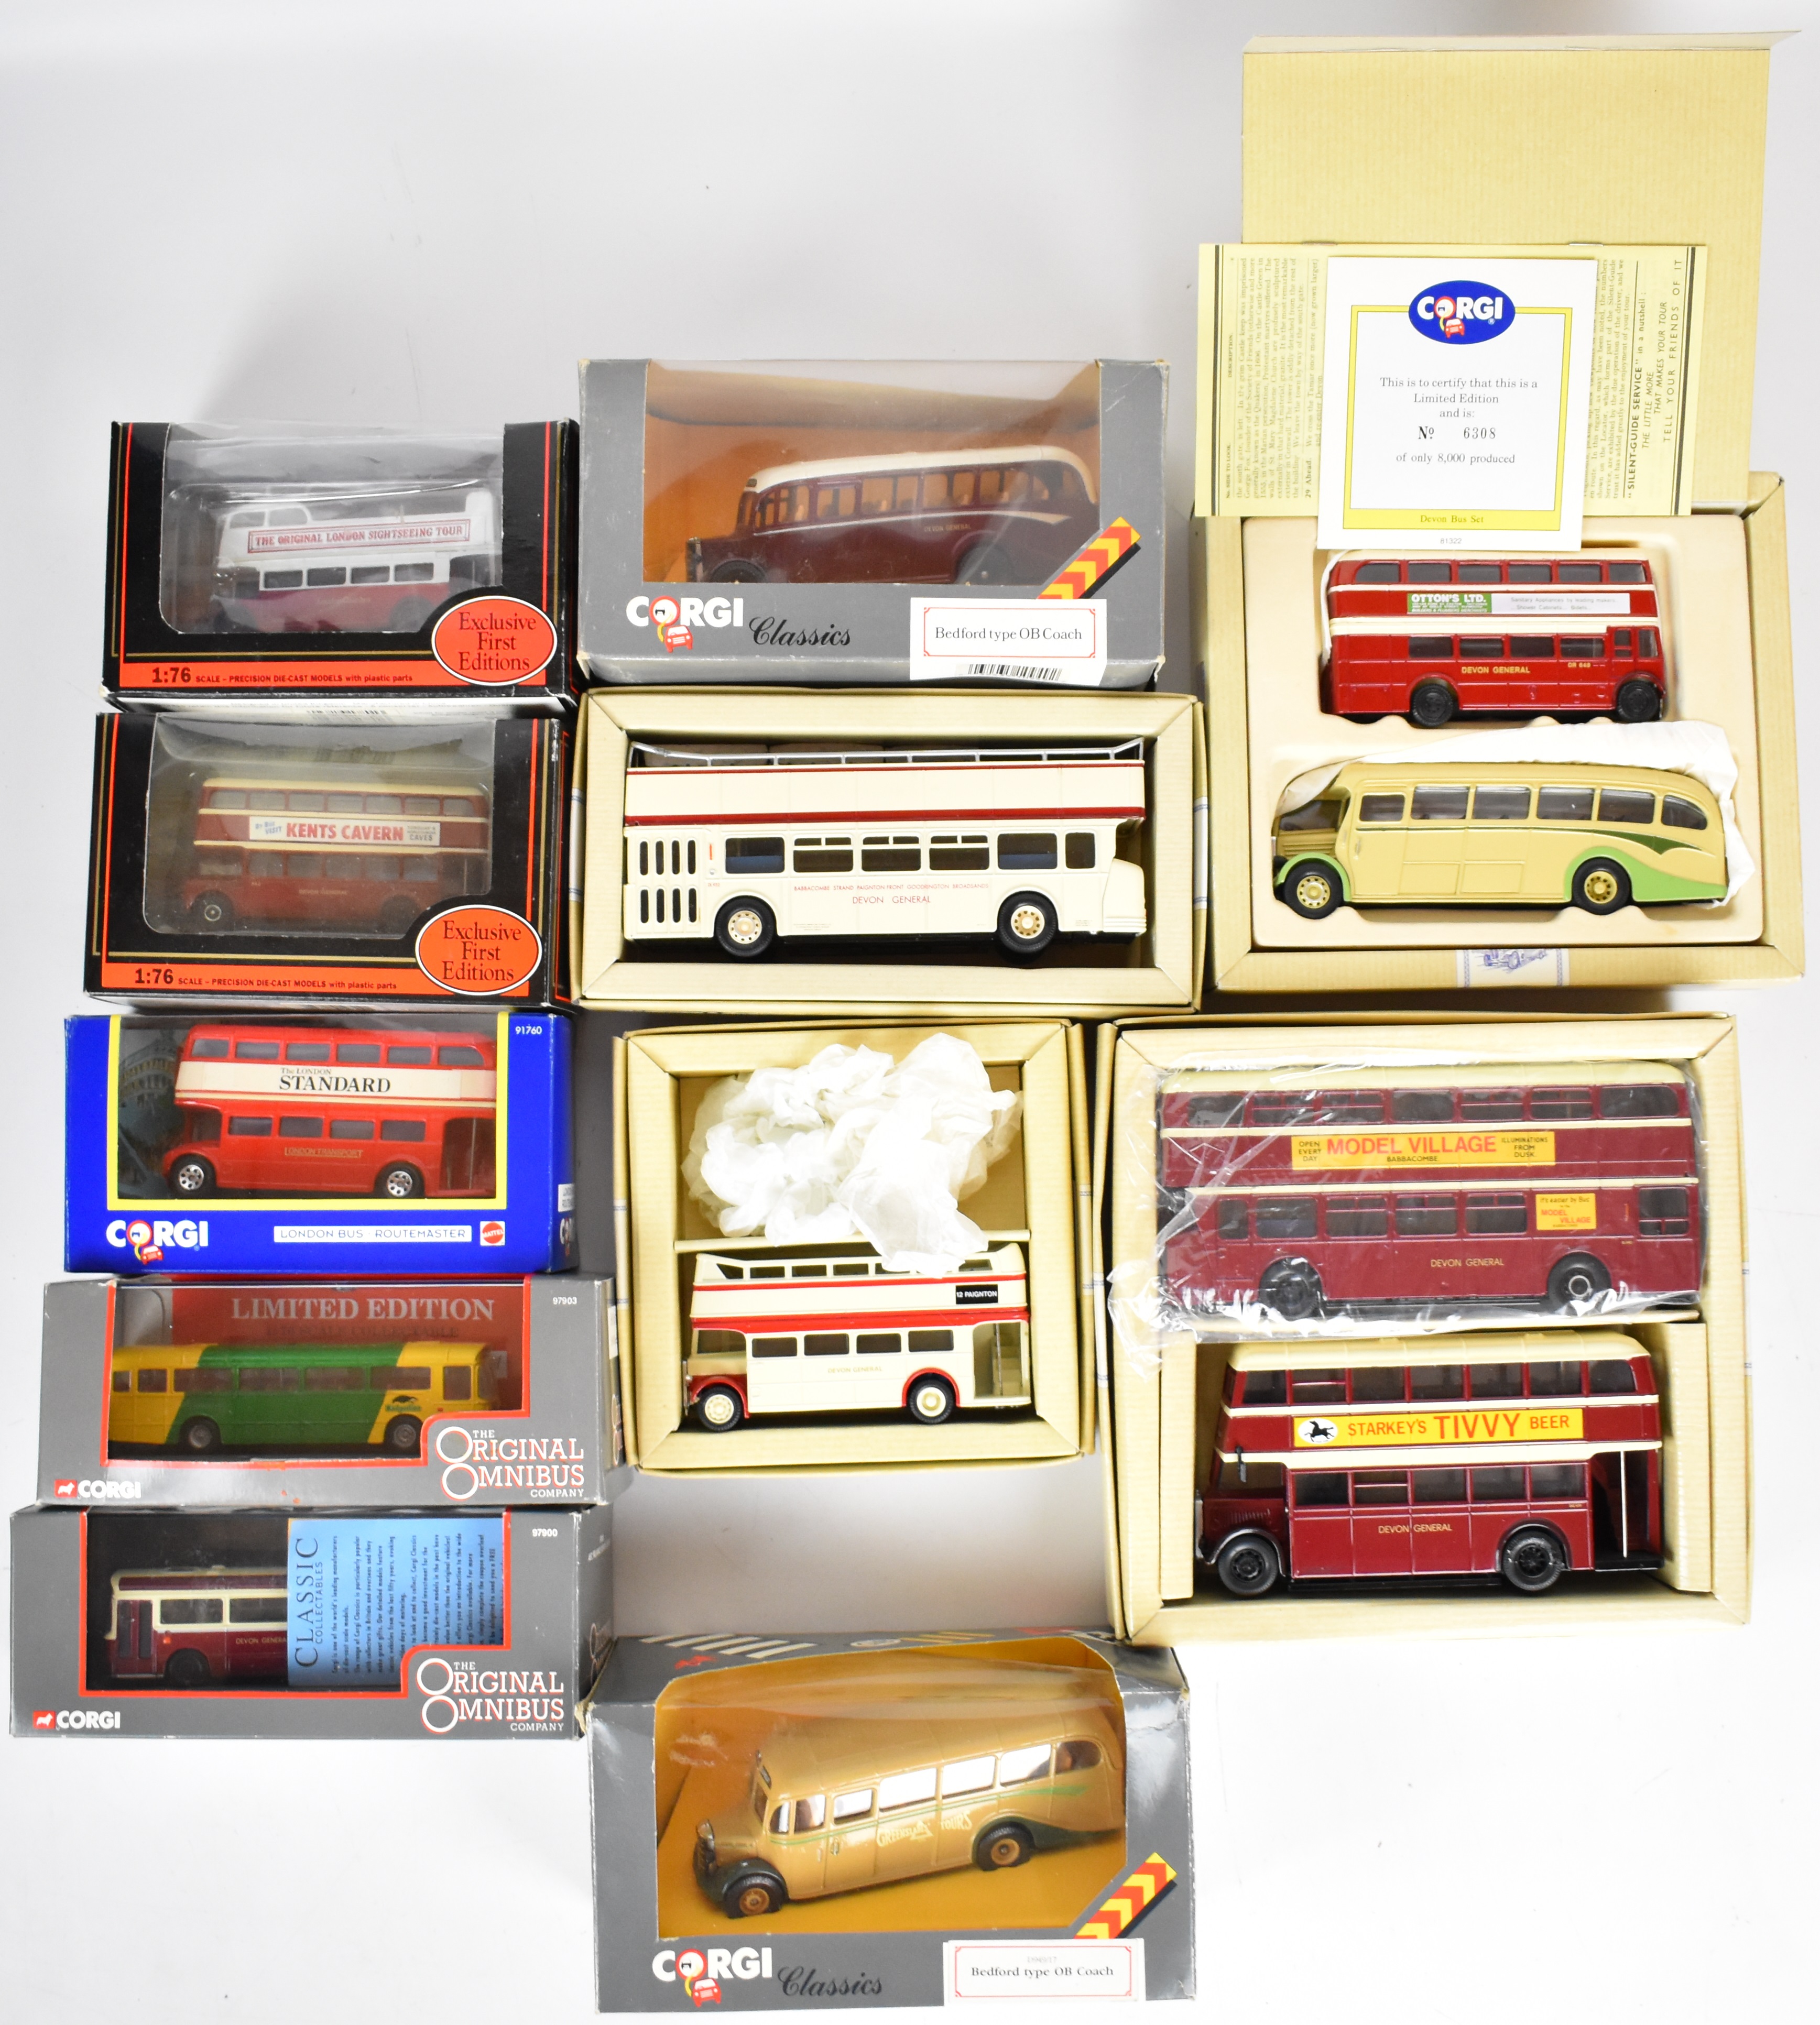 Eleven diecast model buses by Corgi, Exclusive First Editions (EFE) and The Original Omnibus